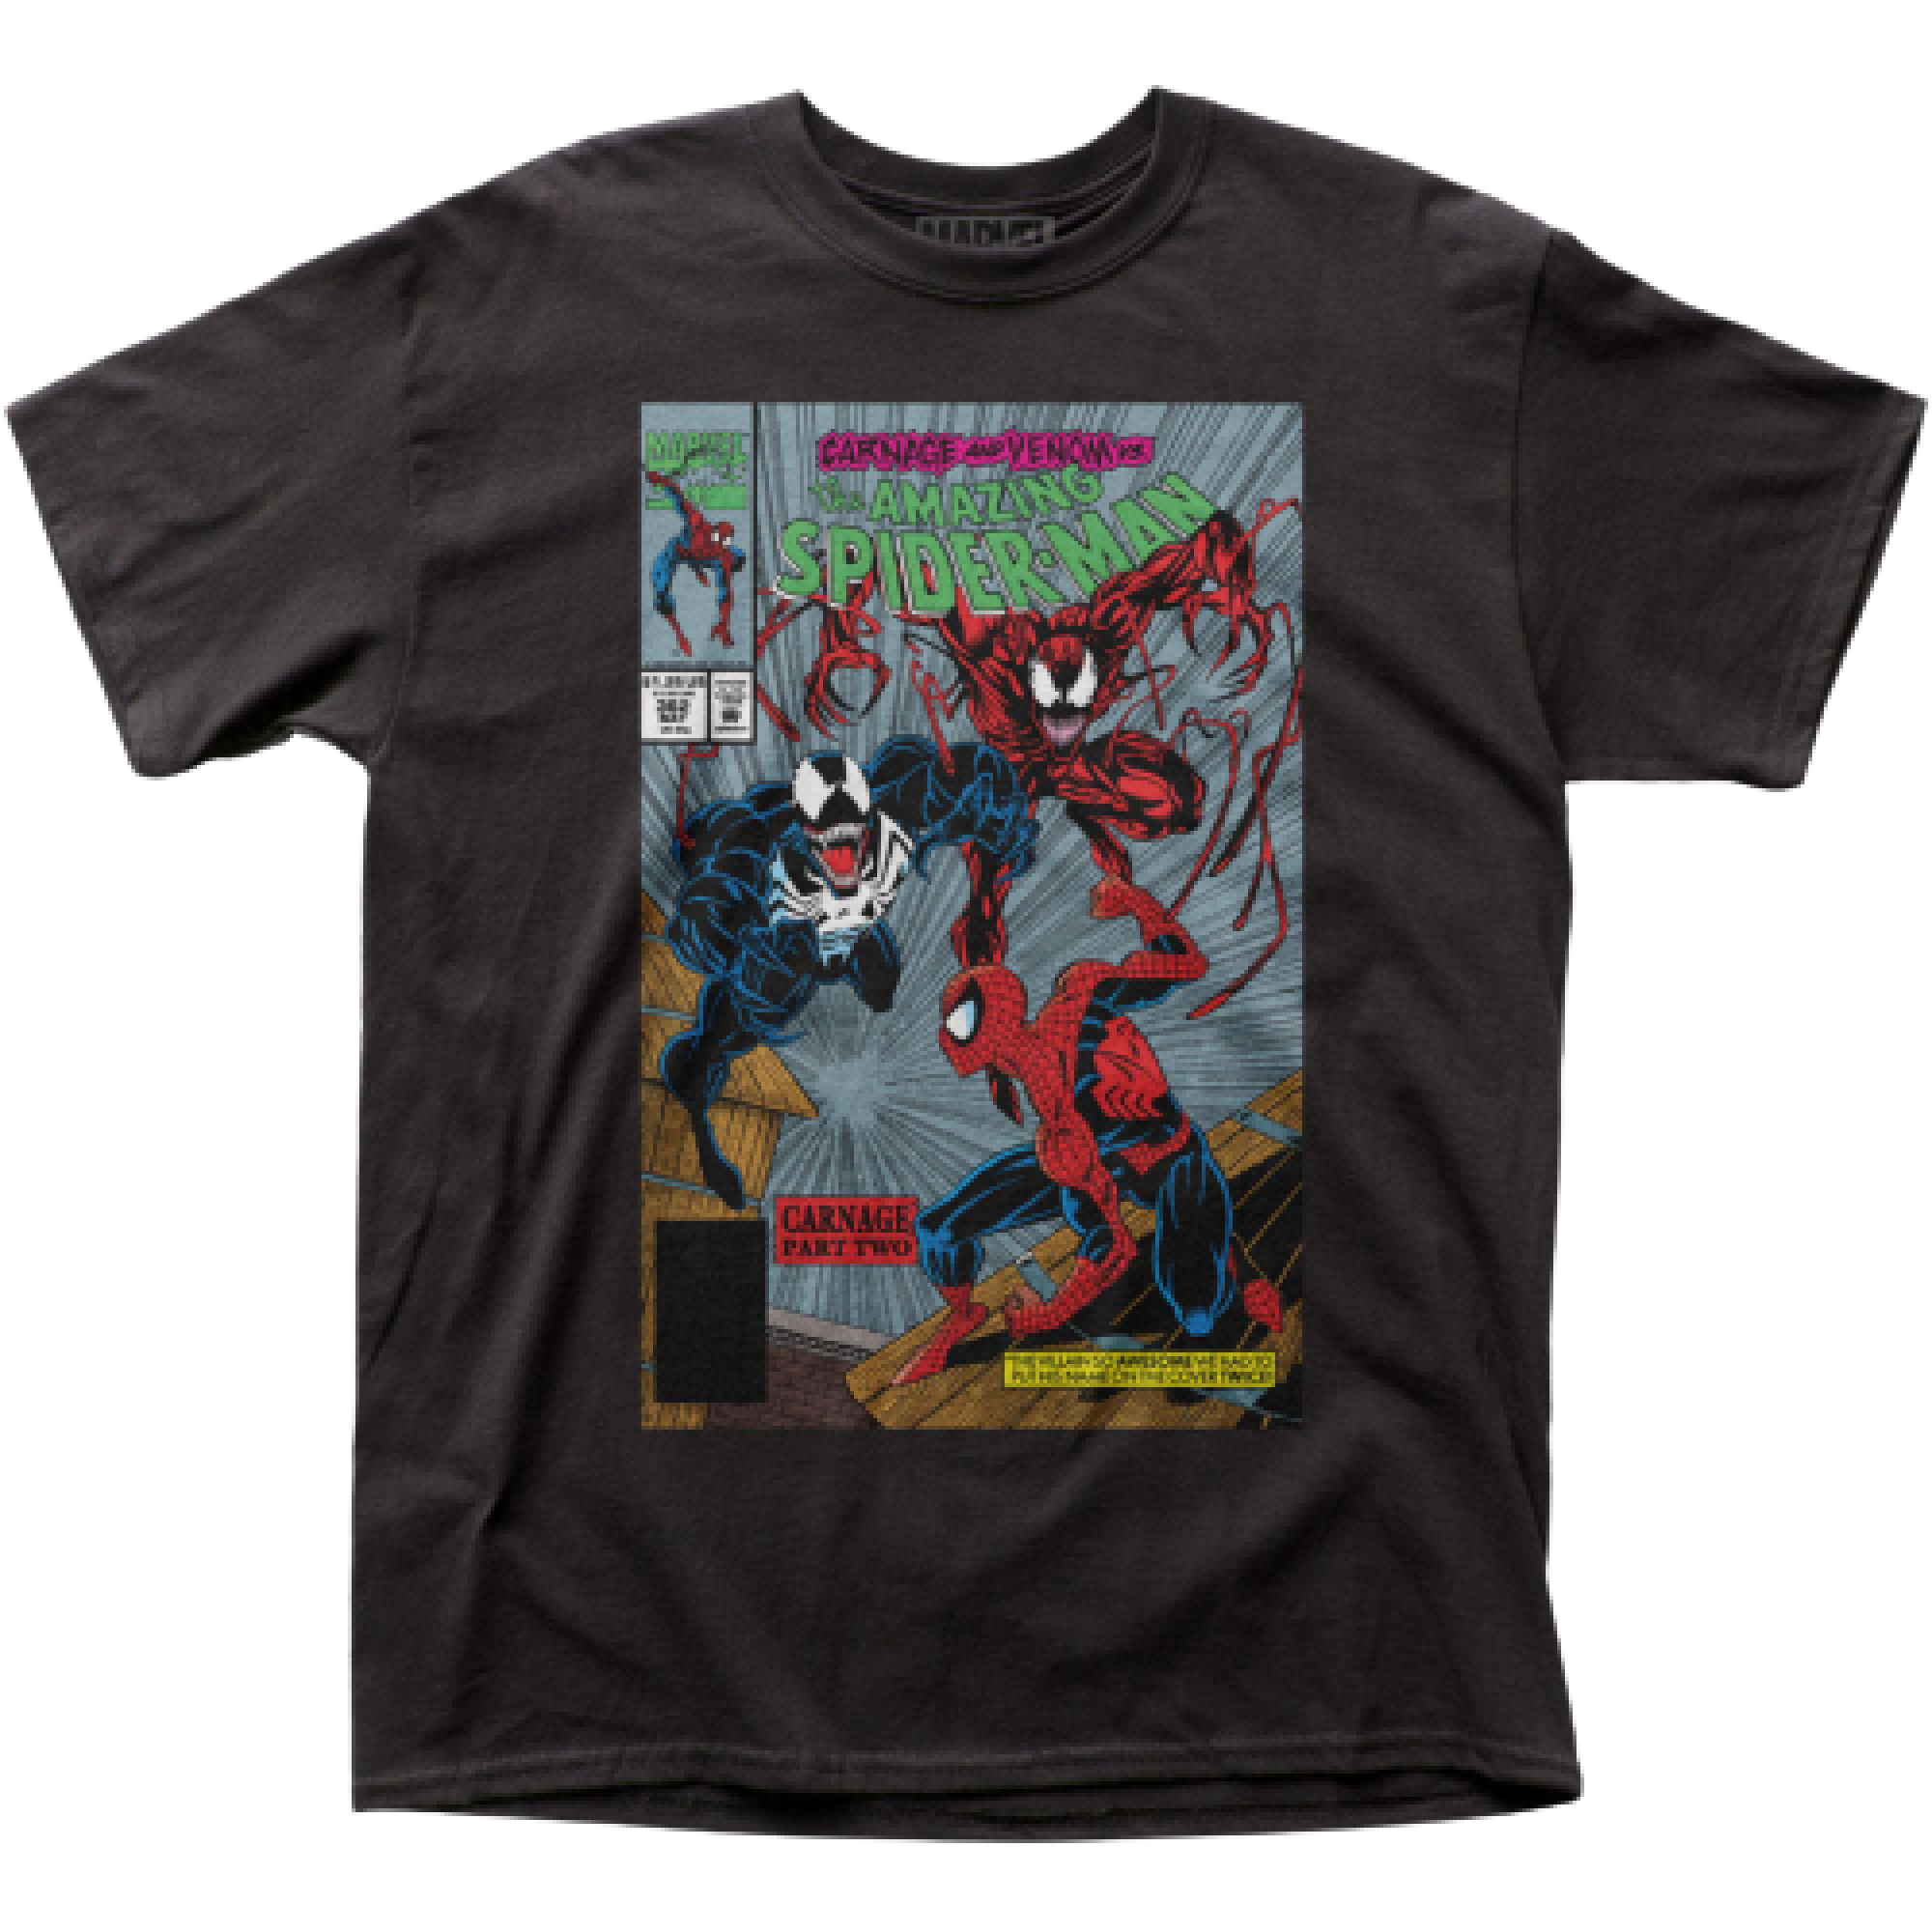 Spider-Man Venom vs Carnage Comic Cover Part Two T-Shirt Small 